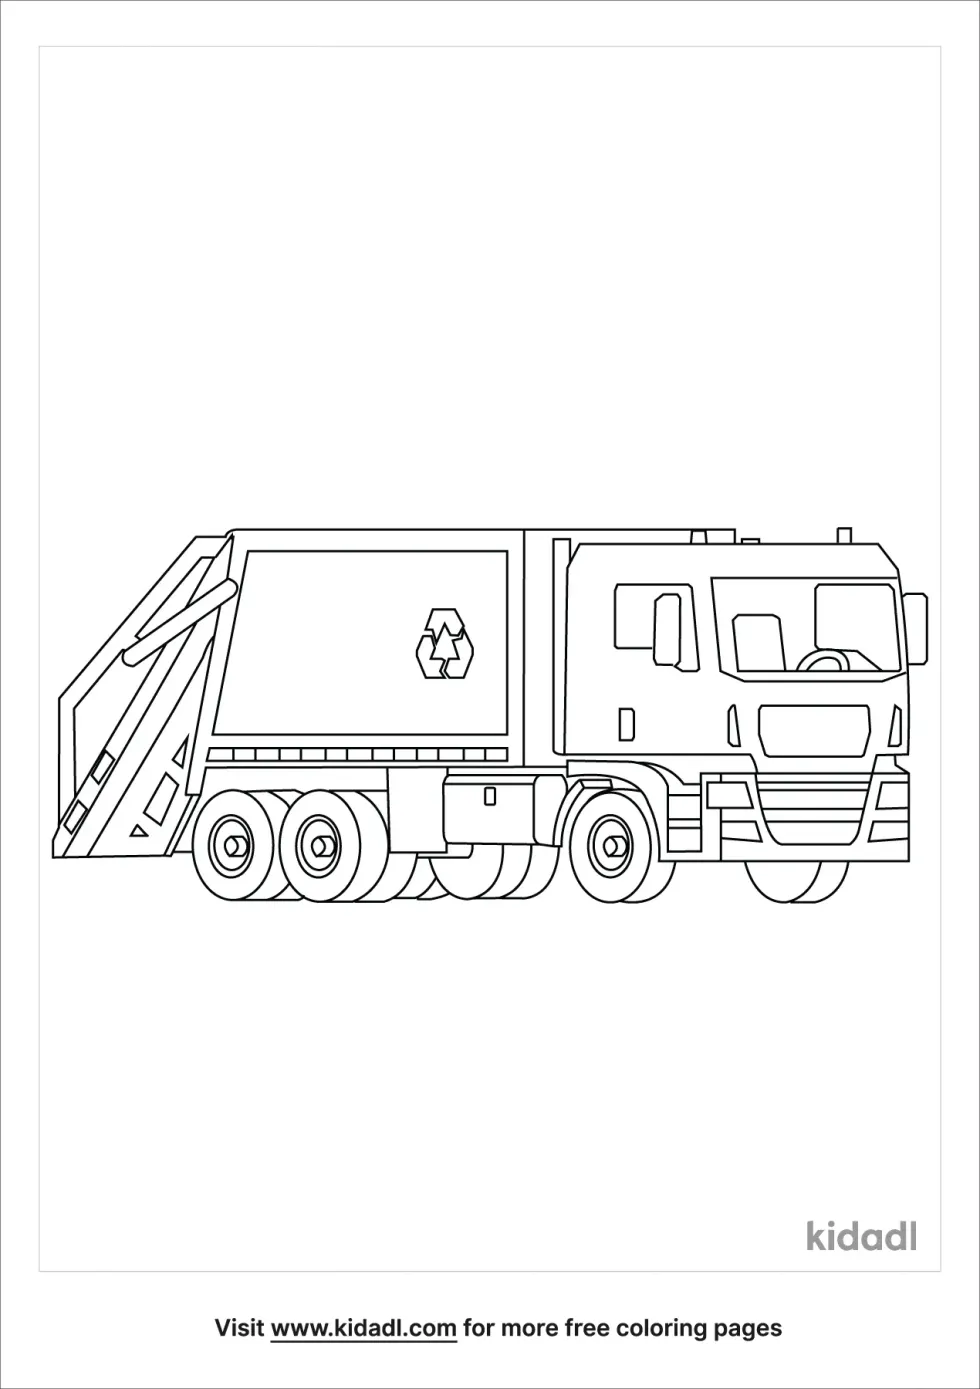 Rear Loader Garbage Truck Coloring Page